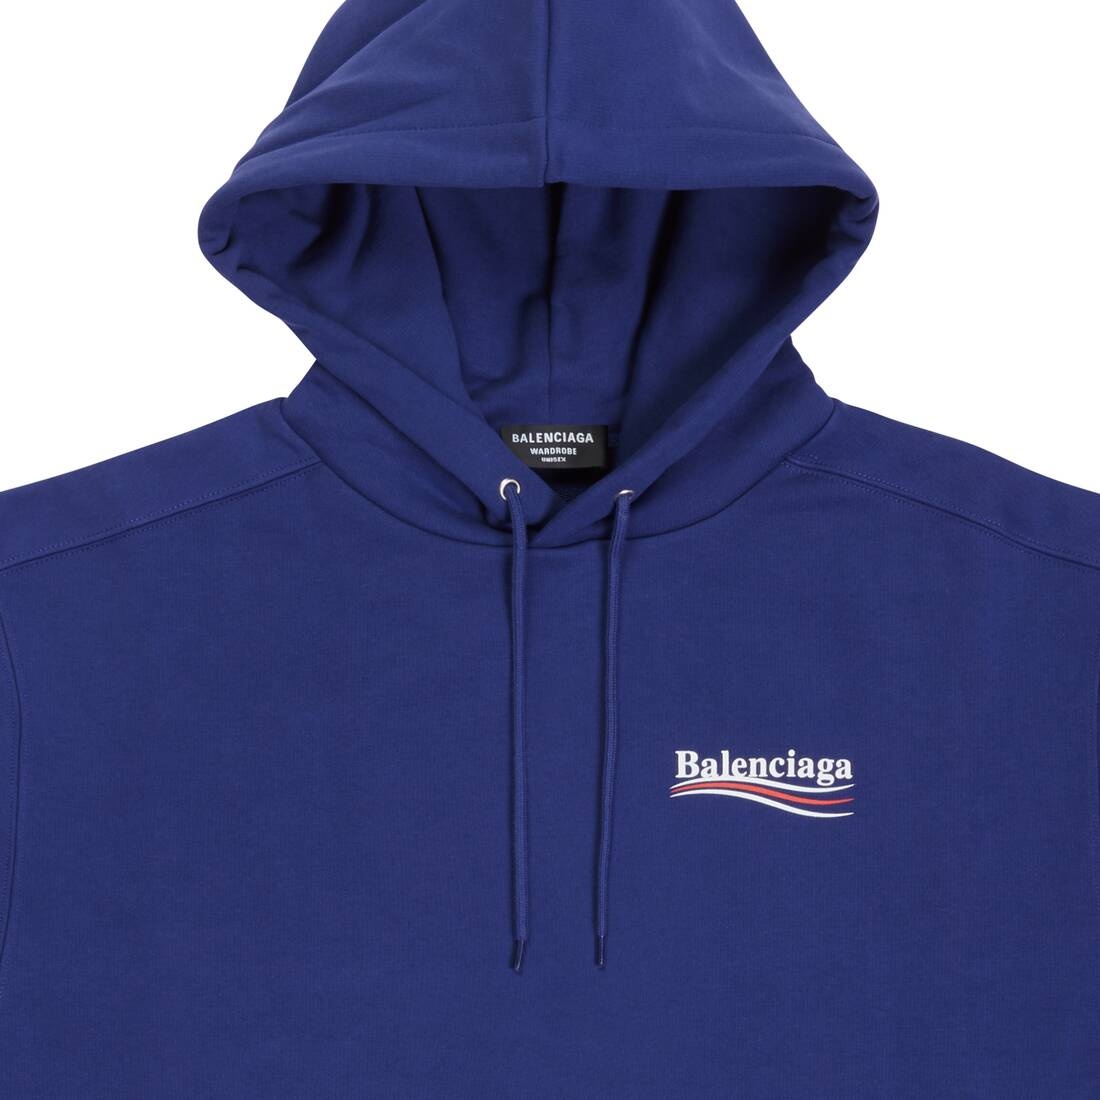 Men's Political Campaign Hoodie Medium Fit in Pacific Blue/white - 7